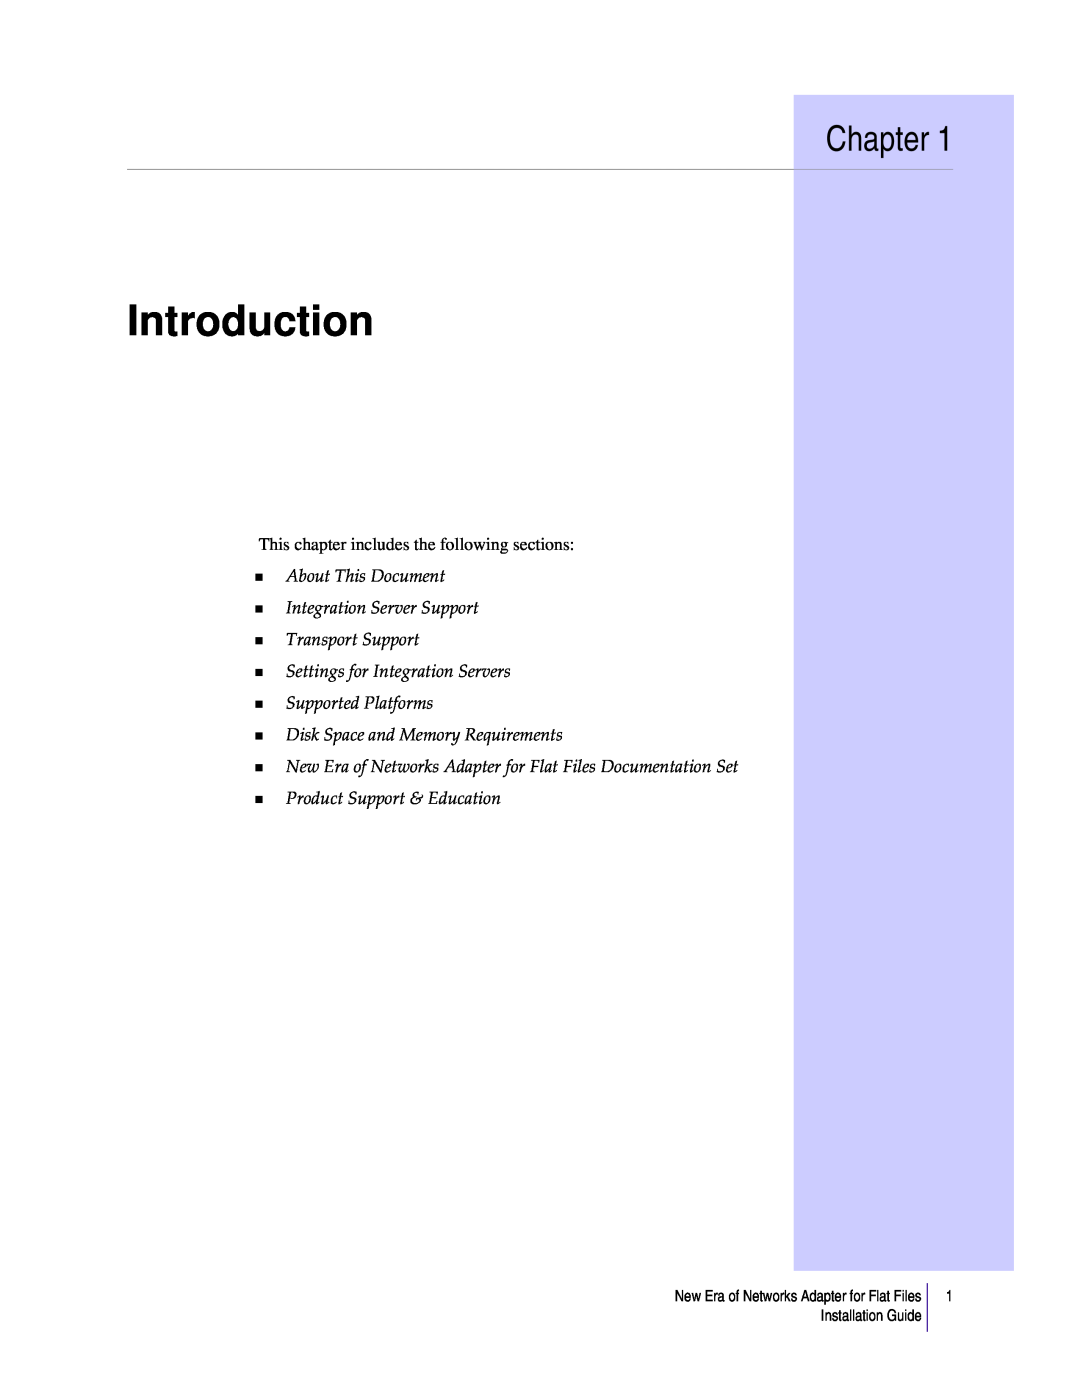 Sybase 3.8 manual Introduction, Chapter, About This Document Integration Server Support Transport Support 